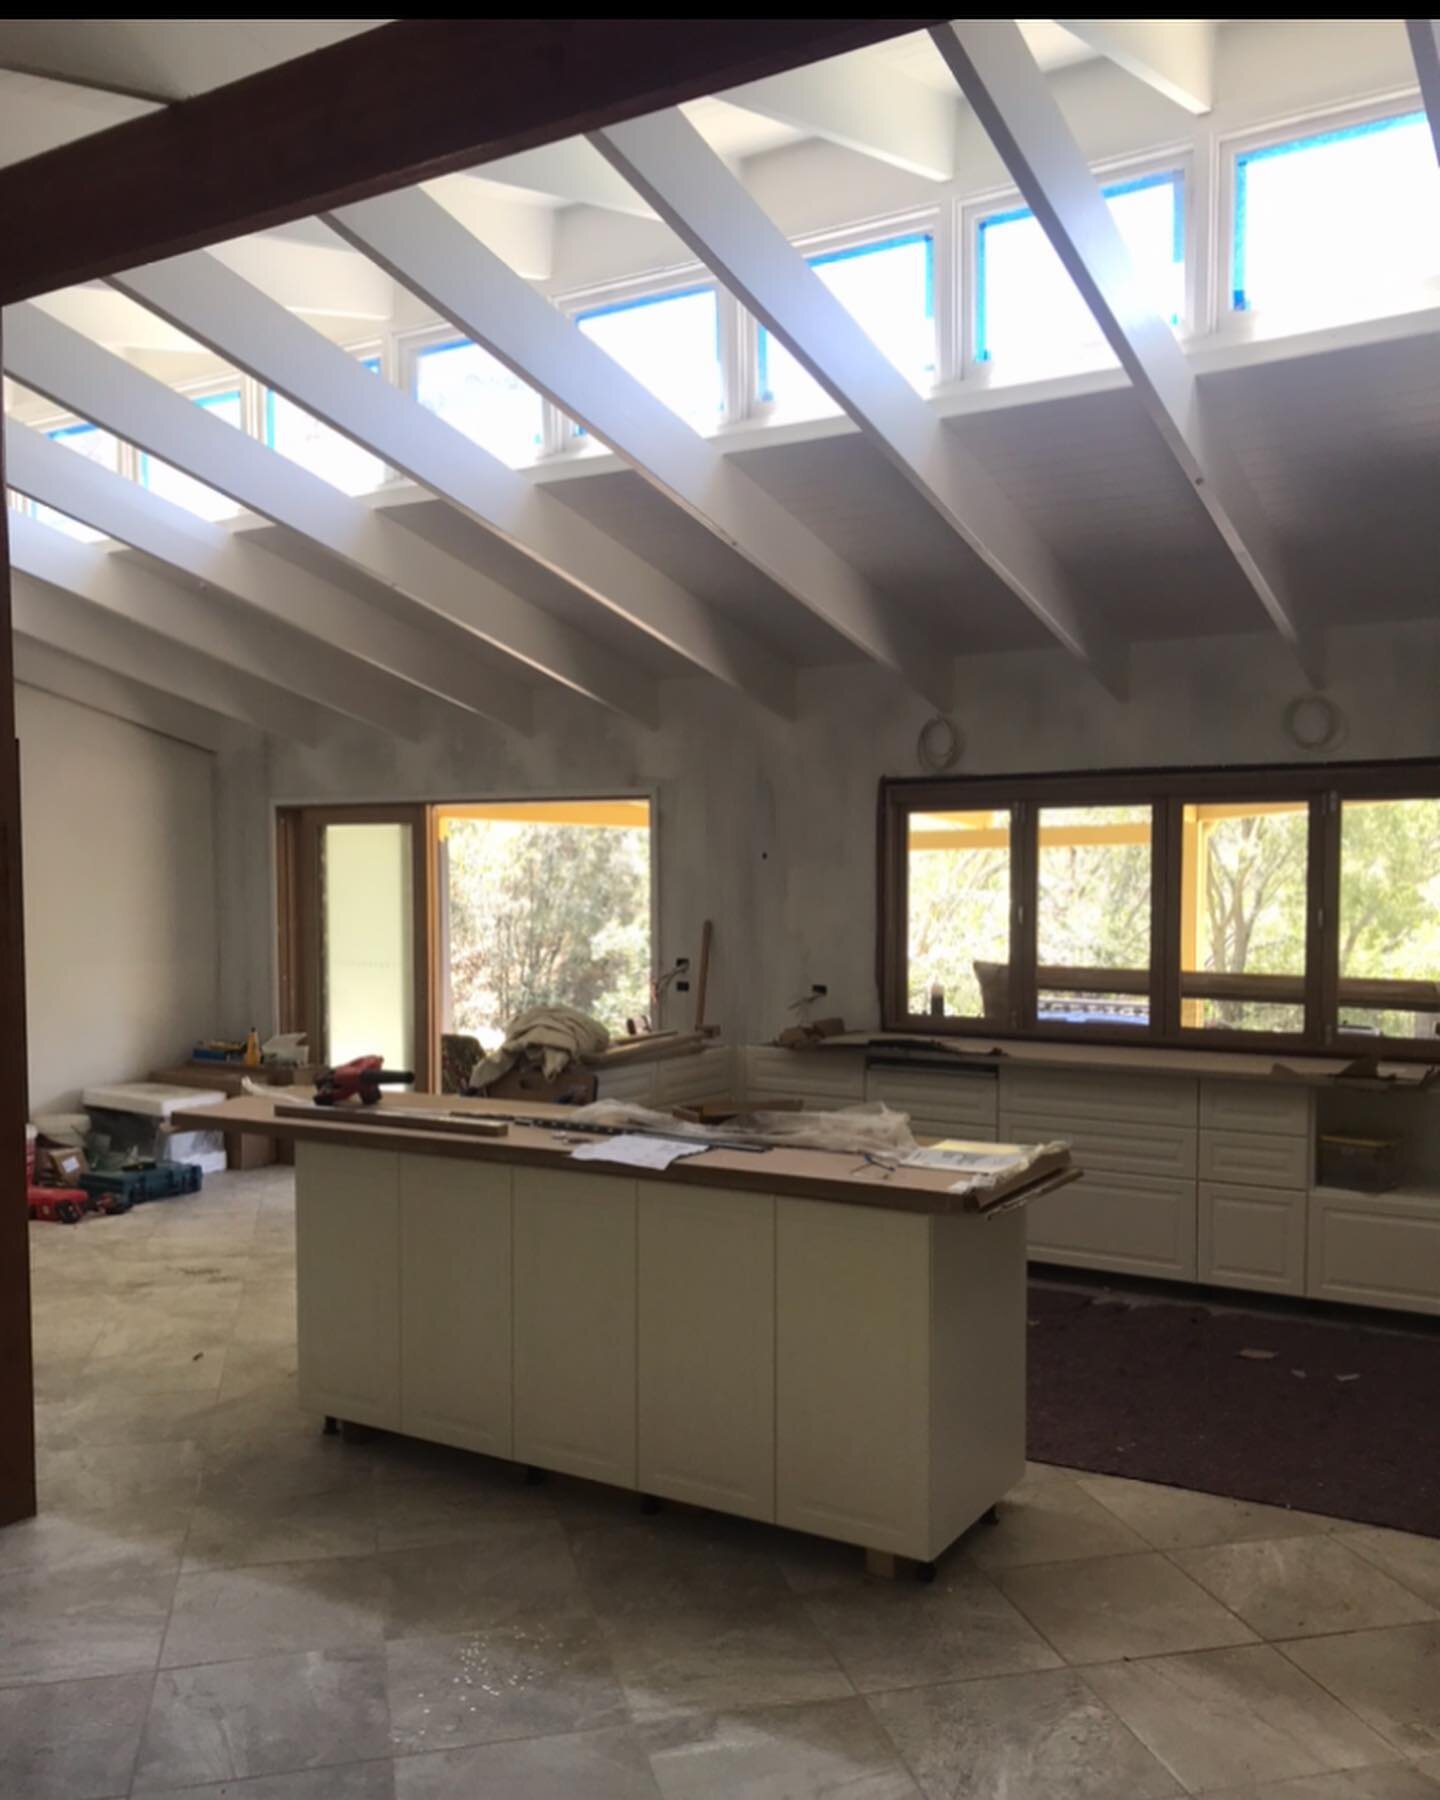 Progress shots for our Marshall Mt project. On schedule to be in by Christmas 🎄. .
.
.
#renovation #austinmer #realestate #familyhouse #rennovation #bulider #builderwollongong #buildersouthcoastnsw #buildersydney #builderilawarra #newhome #uniquehom